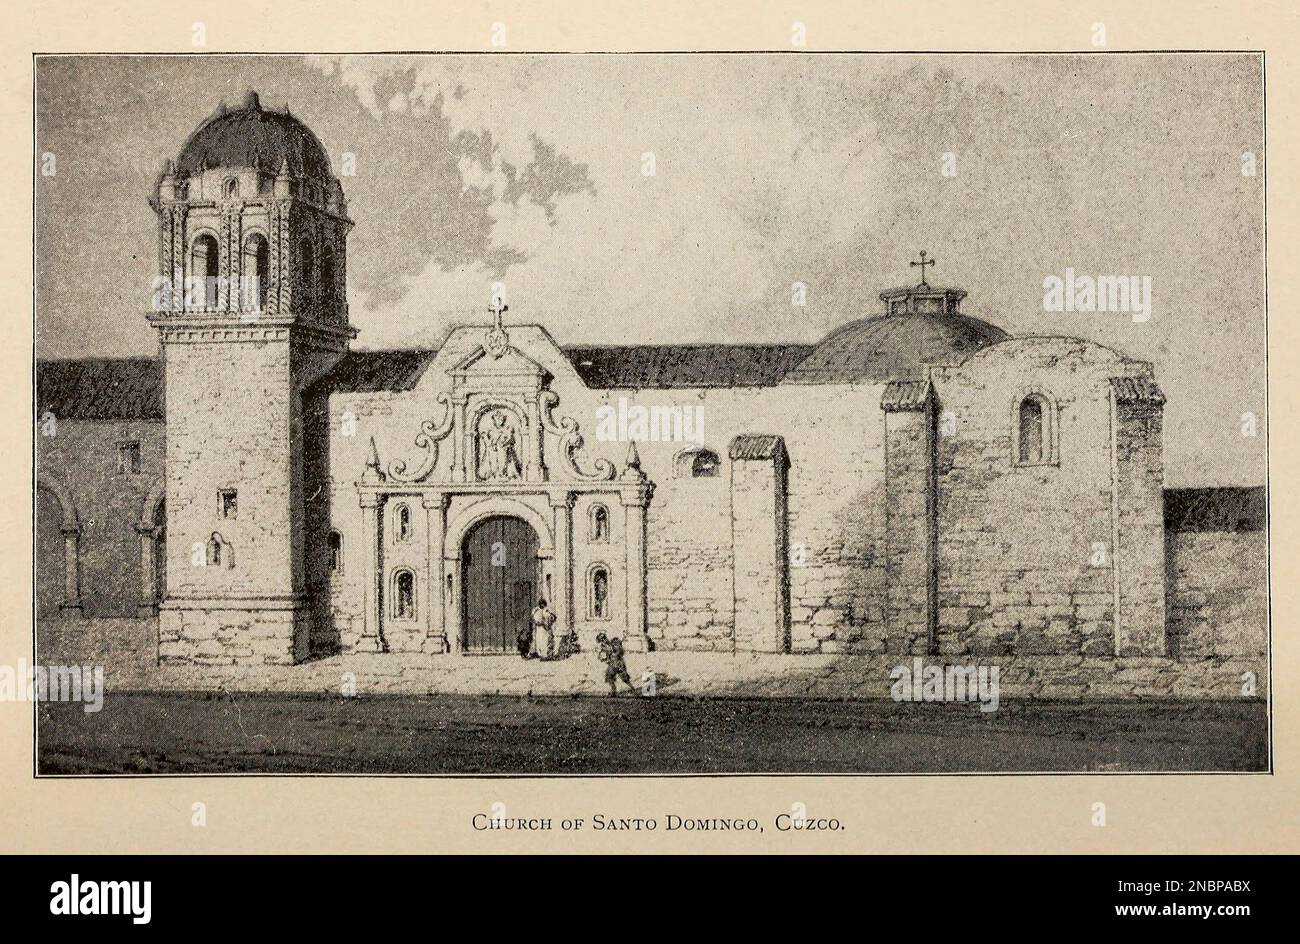 Church of Santa Domingo, Cuzco from the book ' A history of Peru by Sir Clements Robert Markham, Publisher Chicago : C. H. Sergel and Company Publication date 1892 Stock Photo